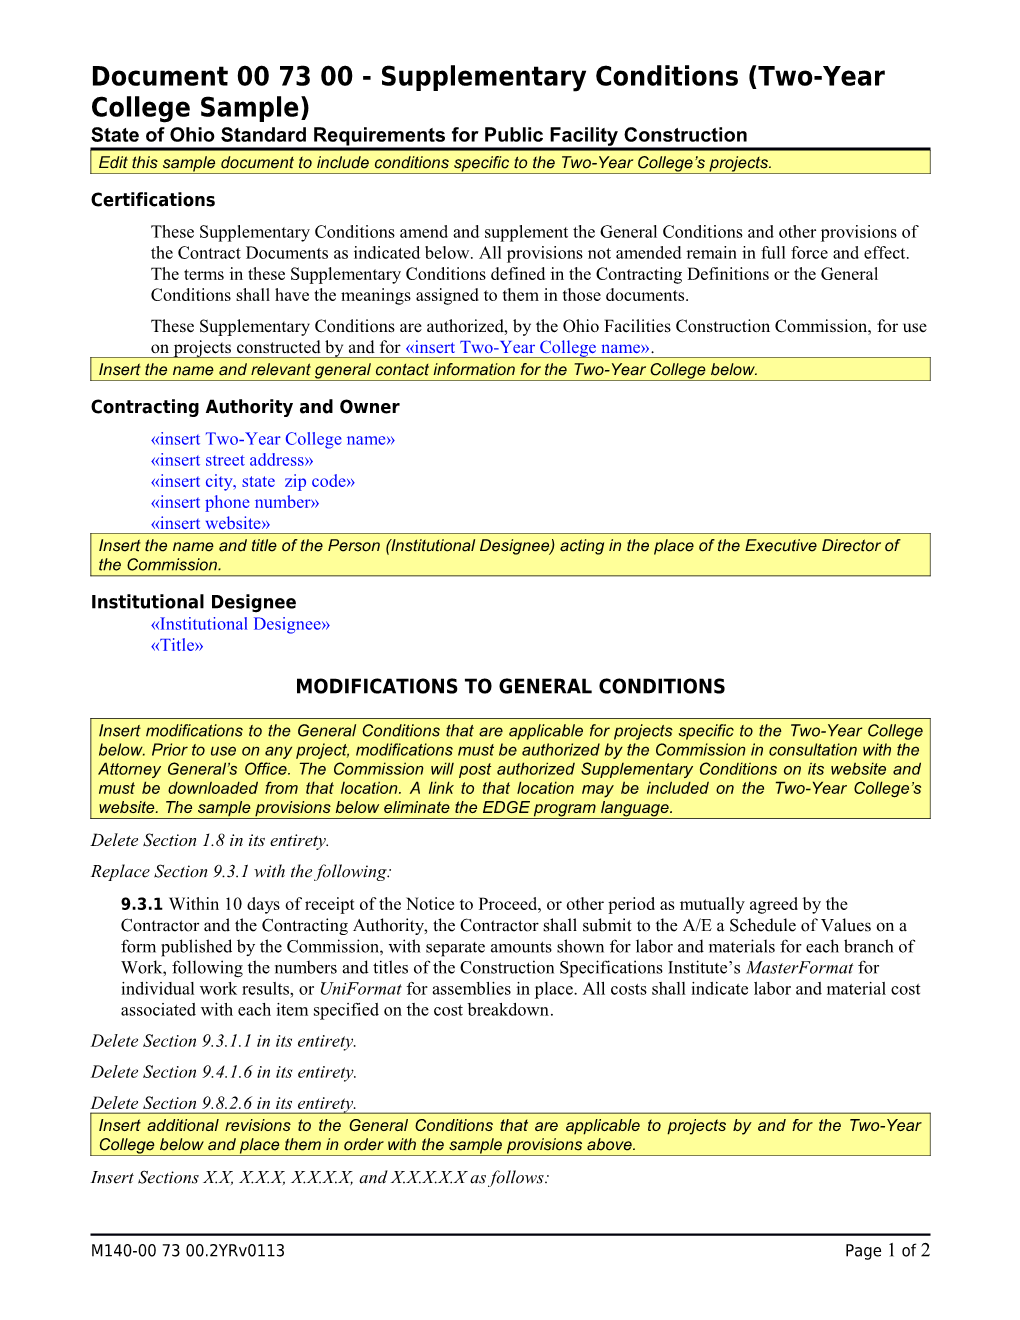 Document 007300 Supplementary Conditions (Two-Year College Sample)